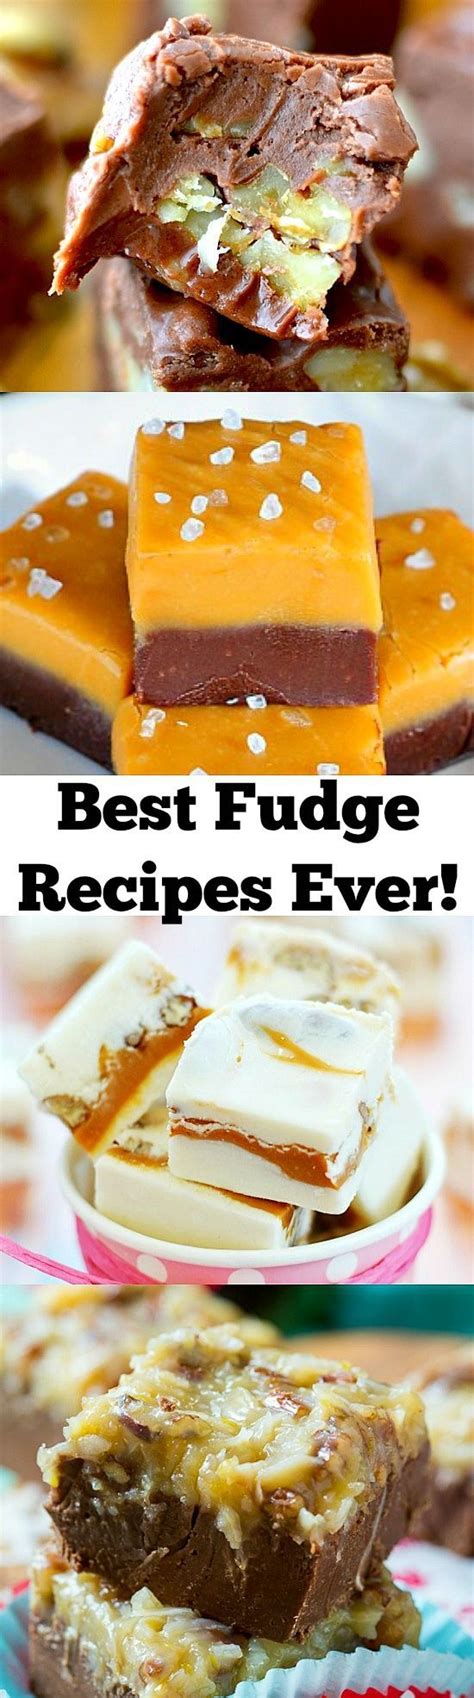 25 Fabulous Fudge Recipes For T Giving And Holiday Parties Fudge